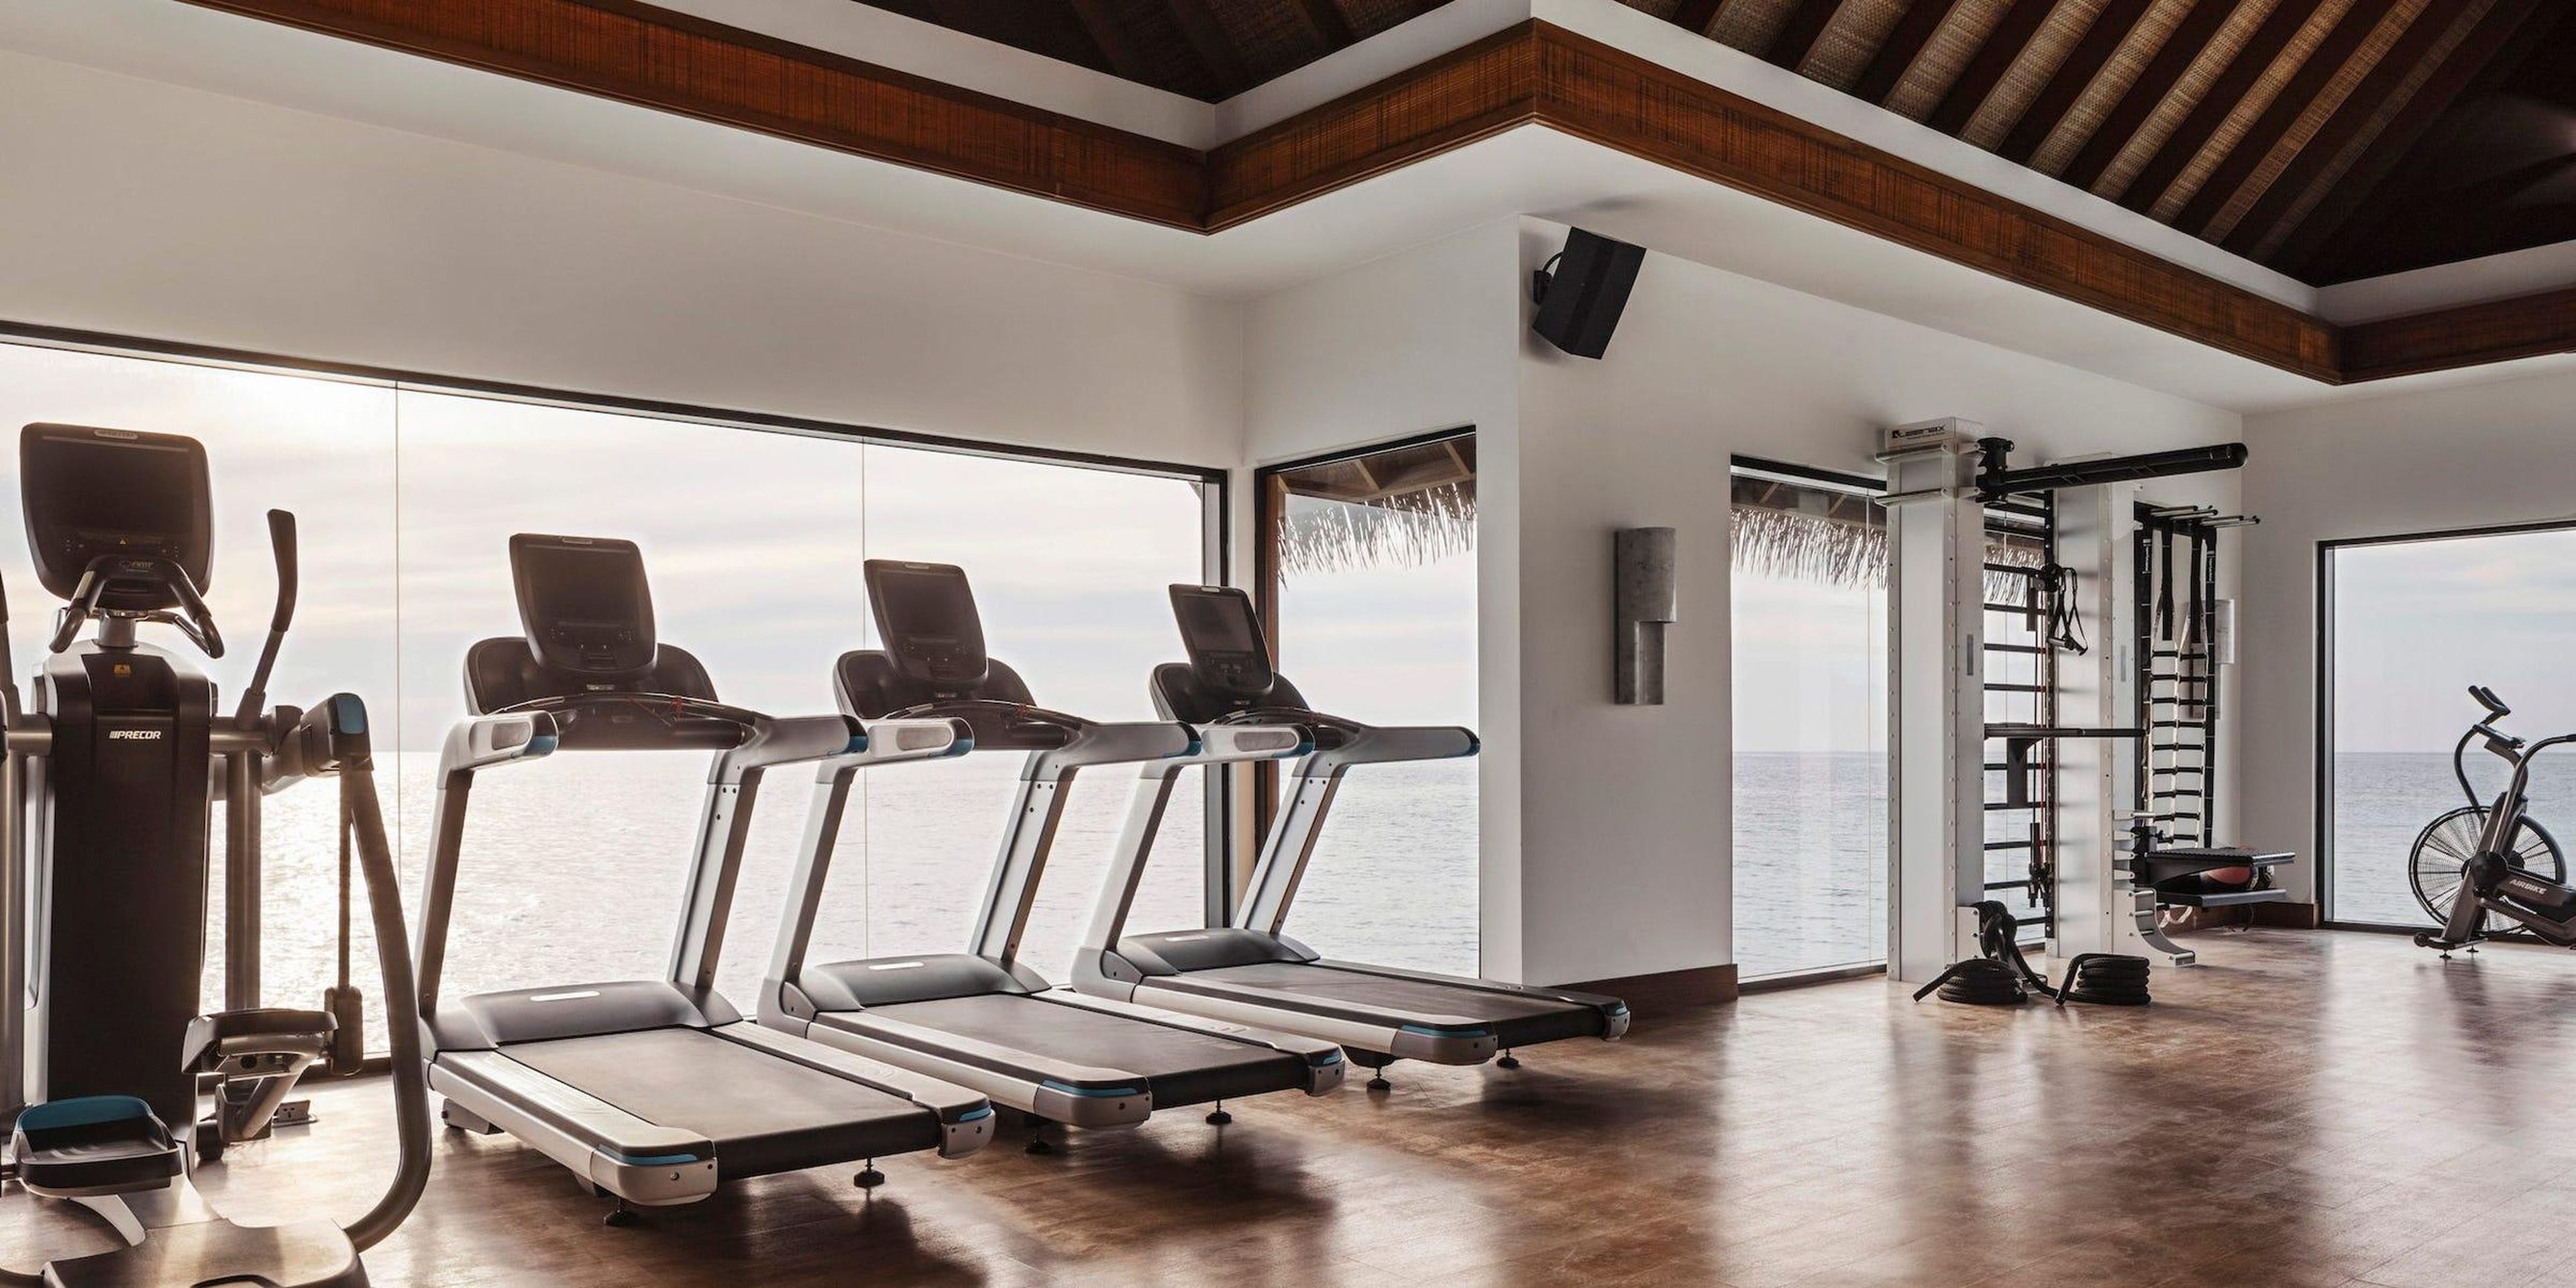 The fitness center at Waldorf Astoria's Ithaafushi private island in the Maldives.